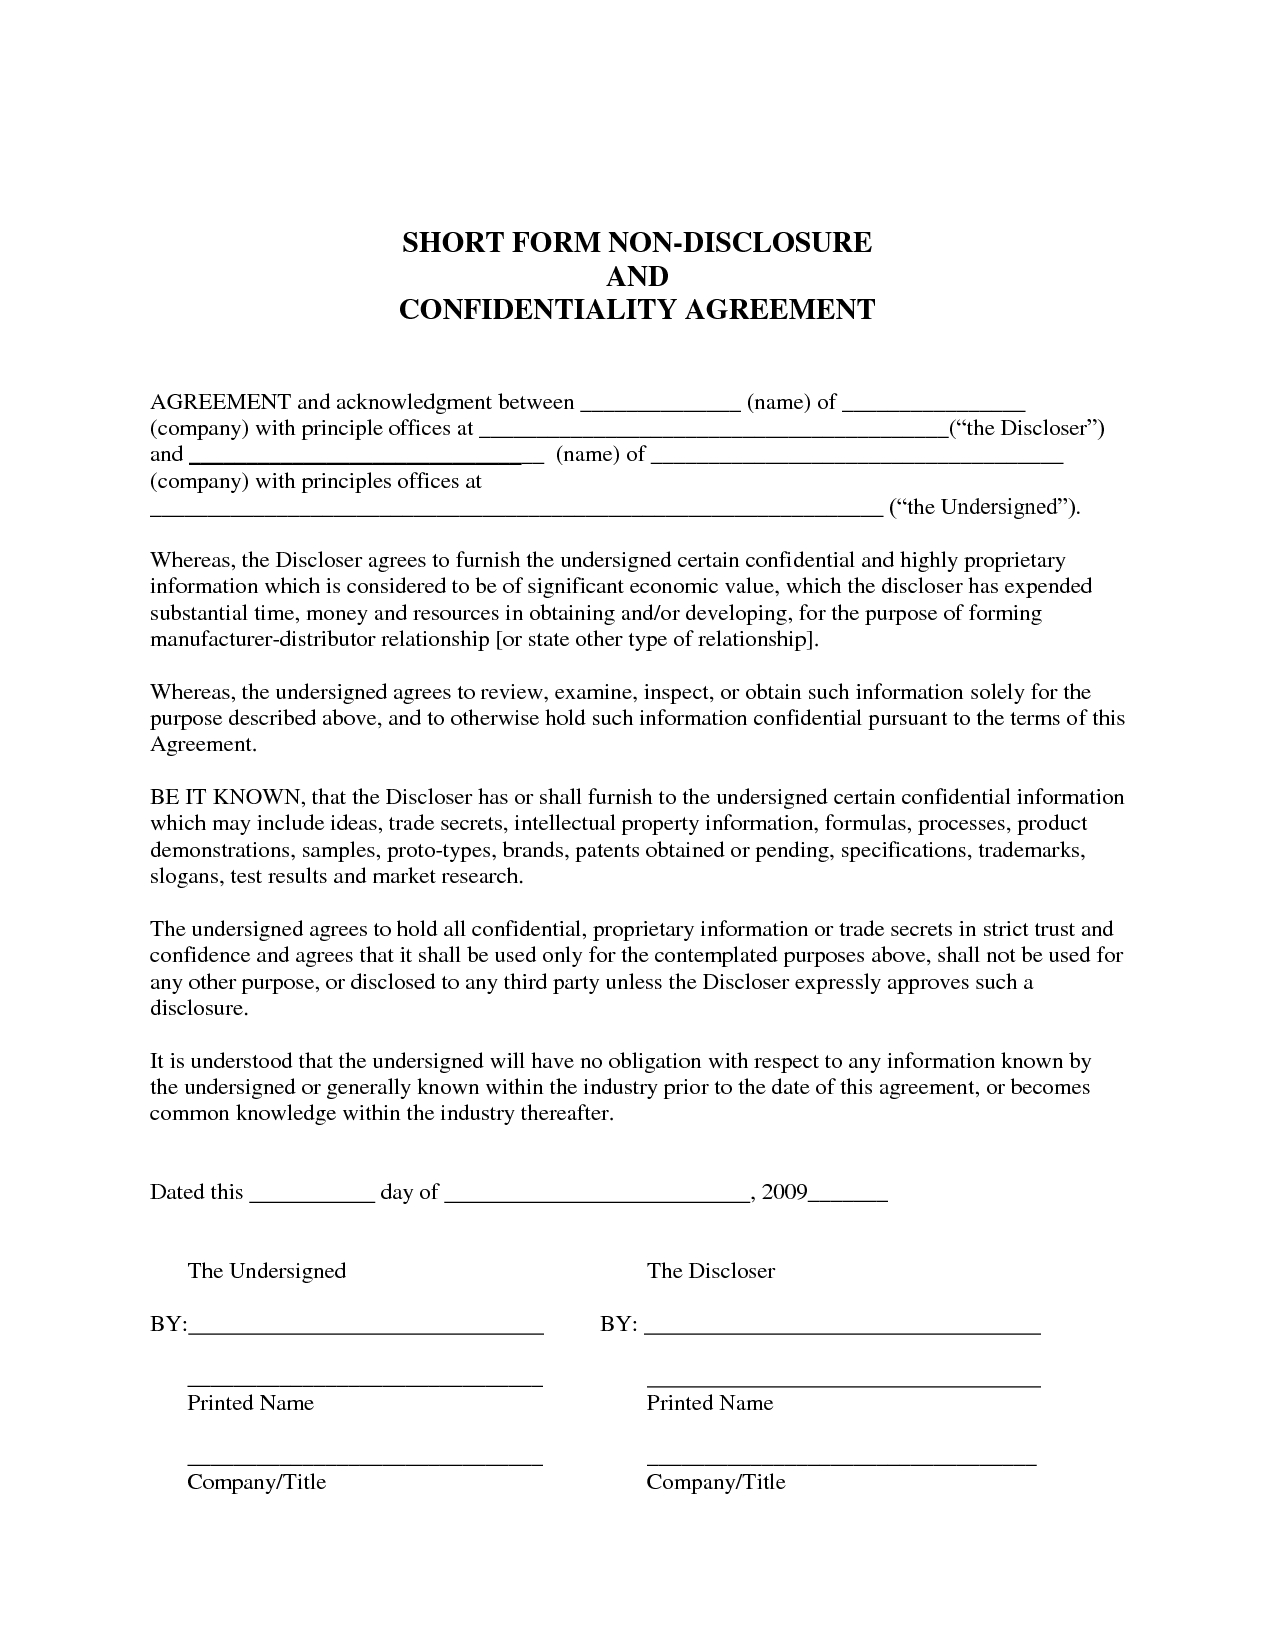 Sample Non Disclosure Agreement Confidentiality Agreement Sample